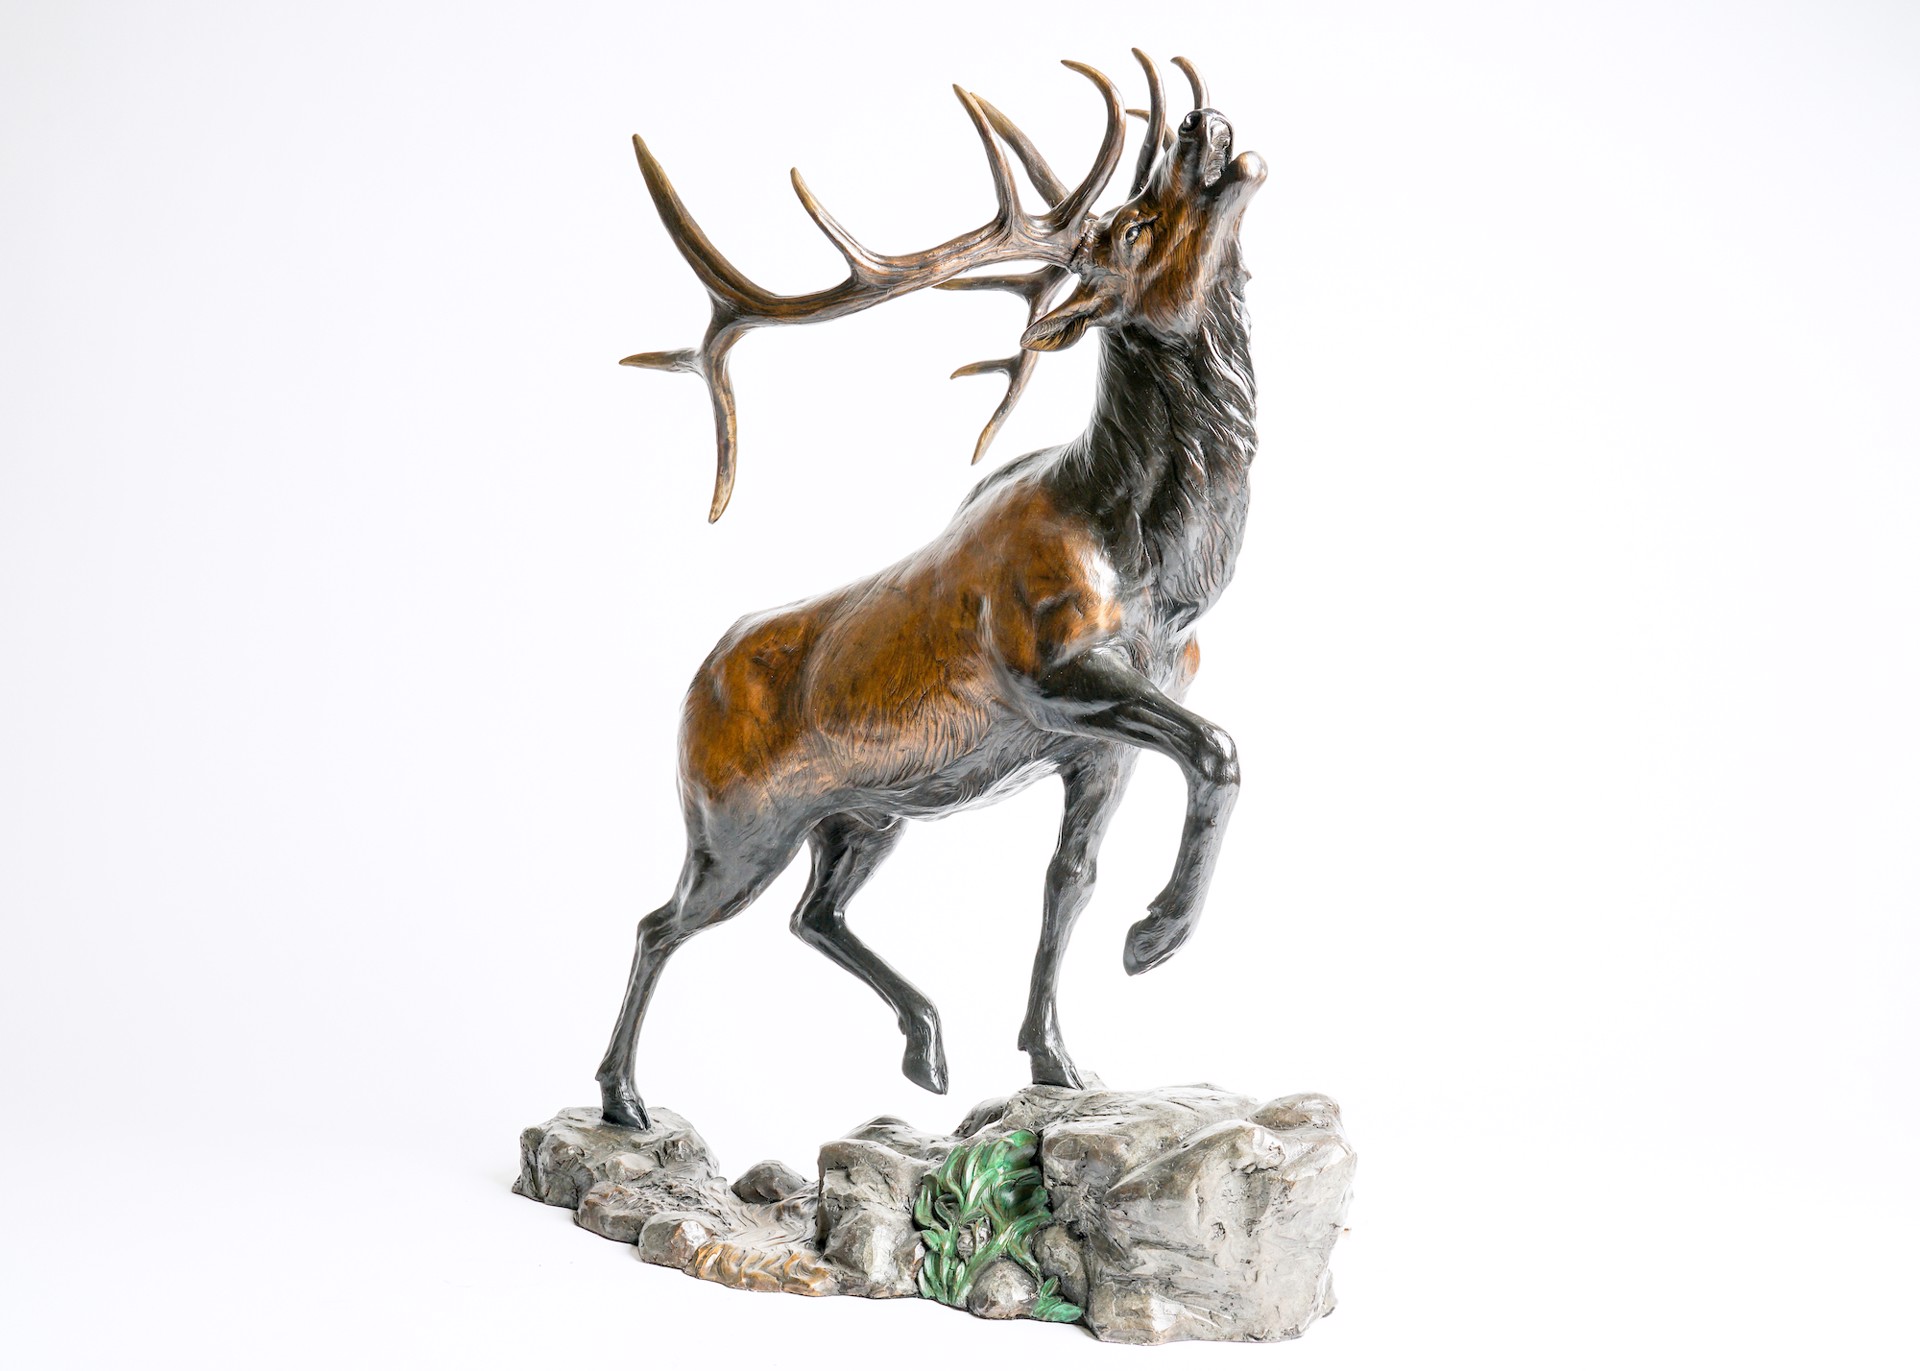 A Bronze Sculpture Of A Bull Elk With Large Antlers Bugling With Head Up Mid Step, By Rip And Alison Caswell